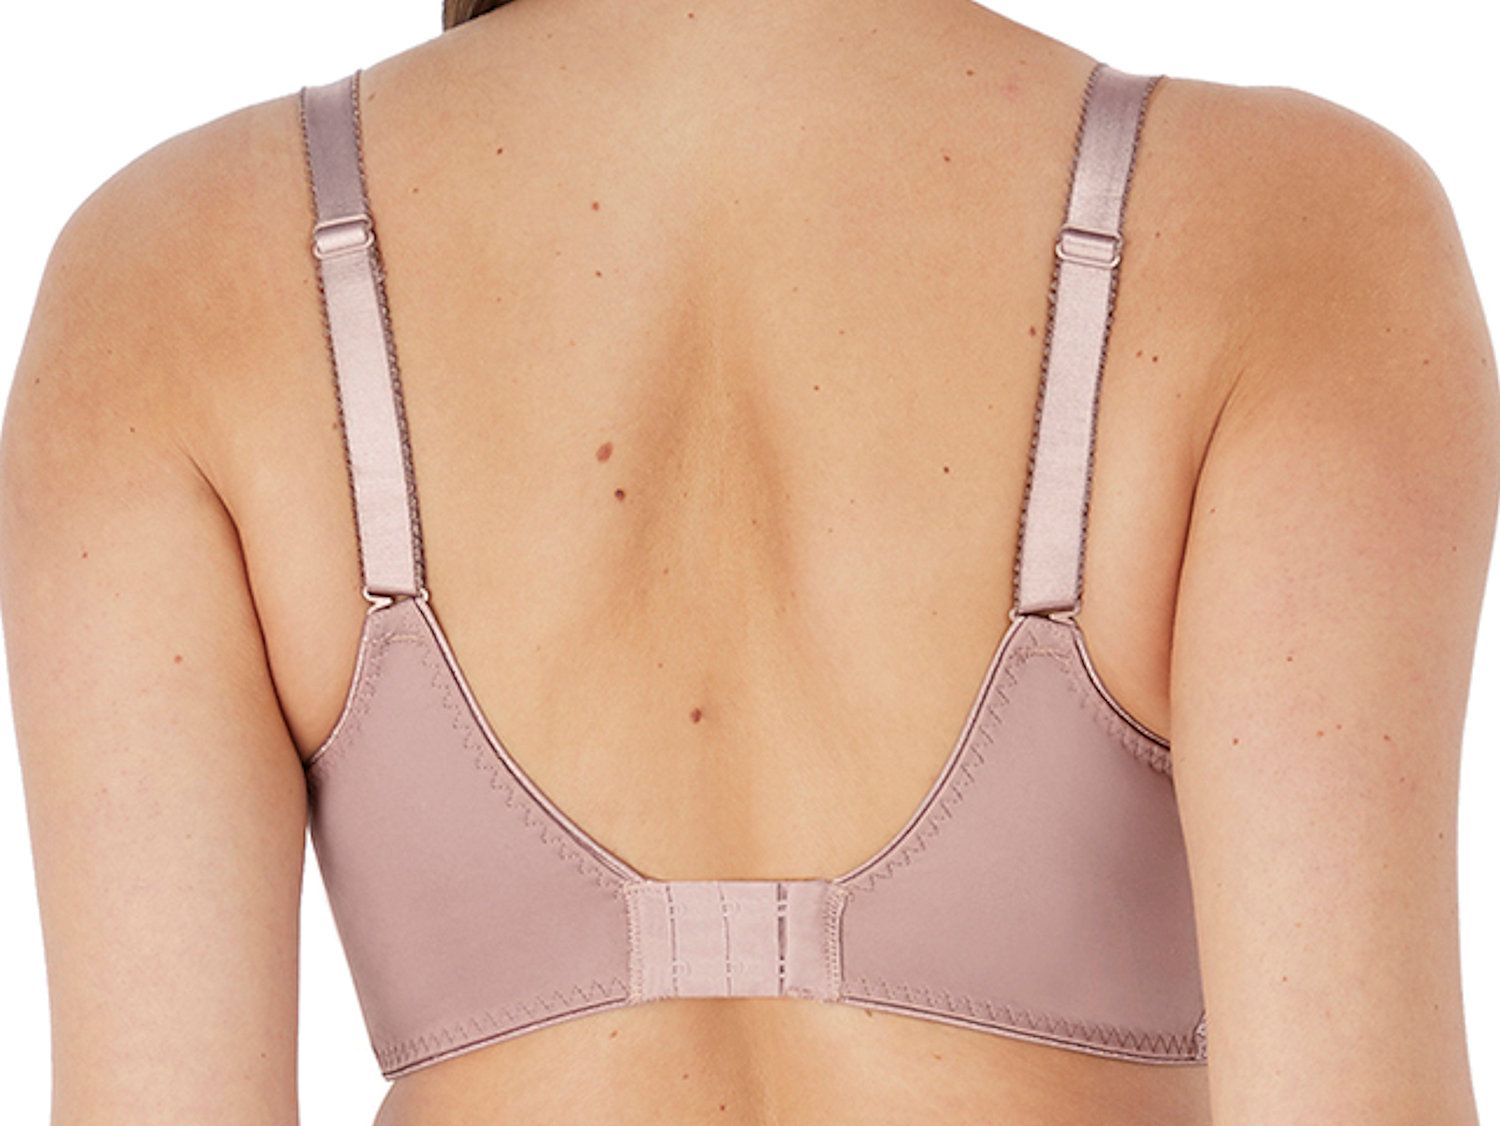 Fantasie Envisage Underwire Full Cup Bra With Side Support - Taupe